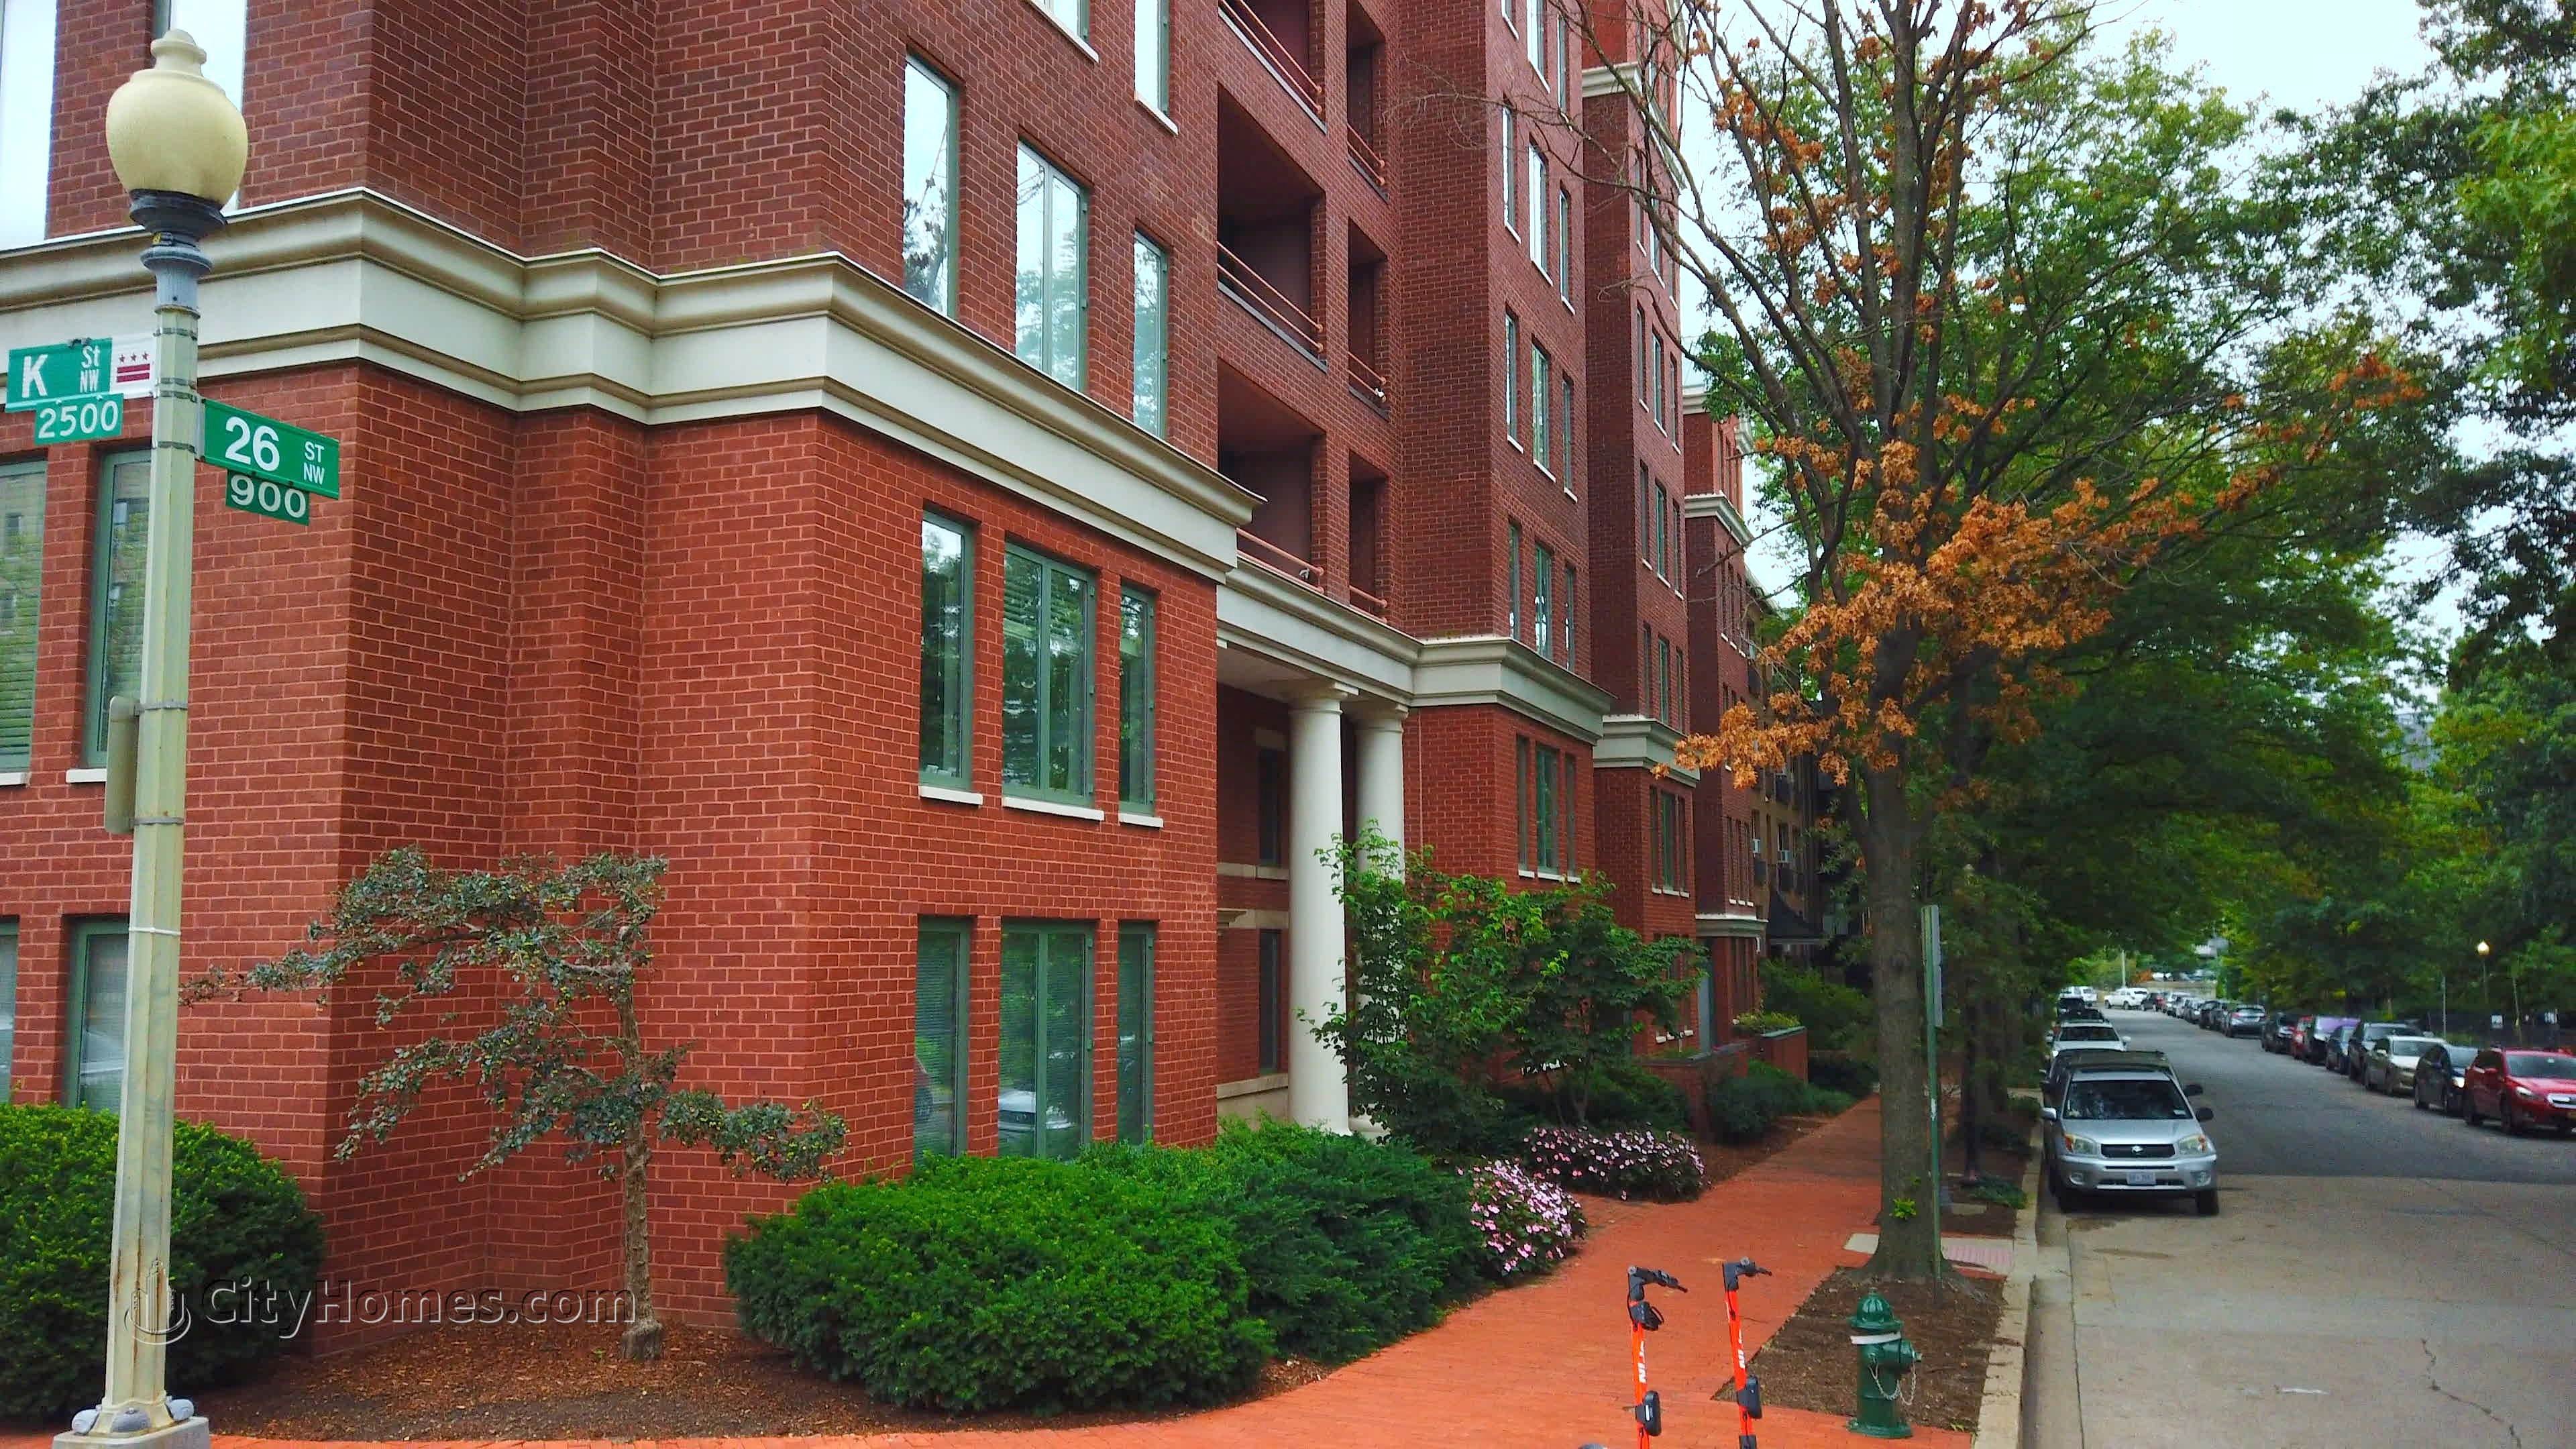 6. The Griffin building at 955 26th St NW, Foggy Bottom, Washington, DC 20037